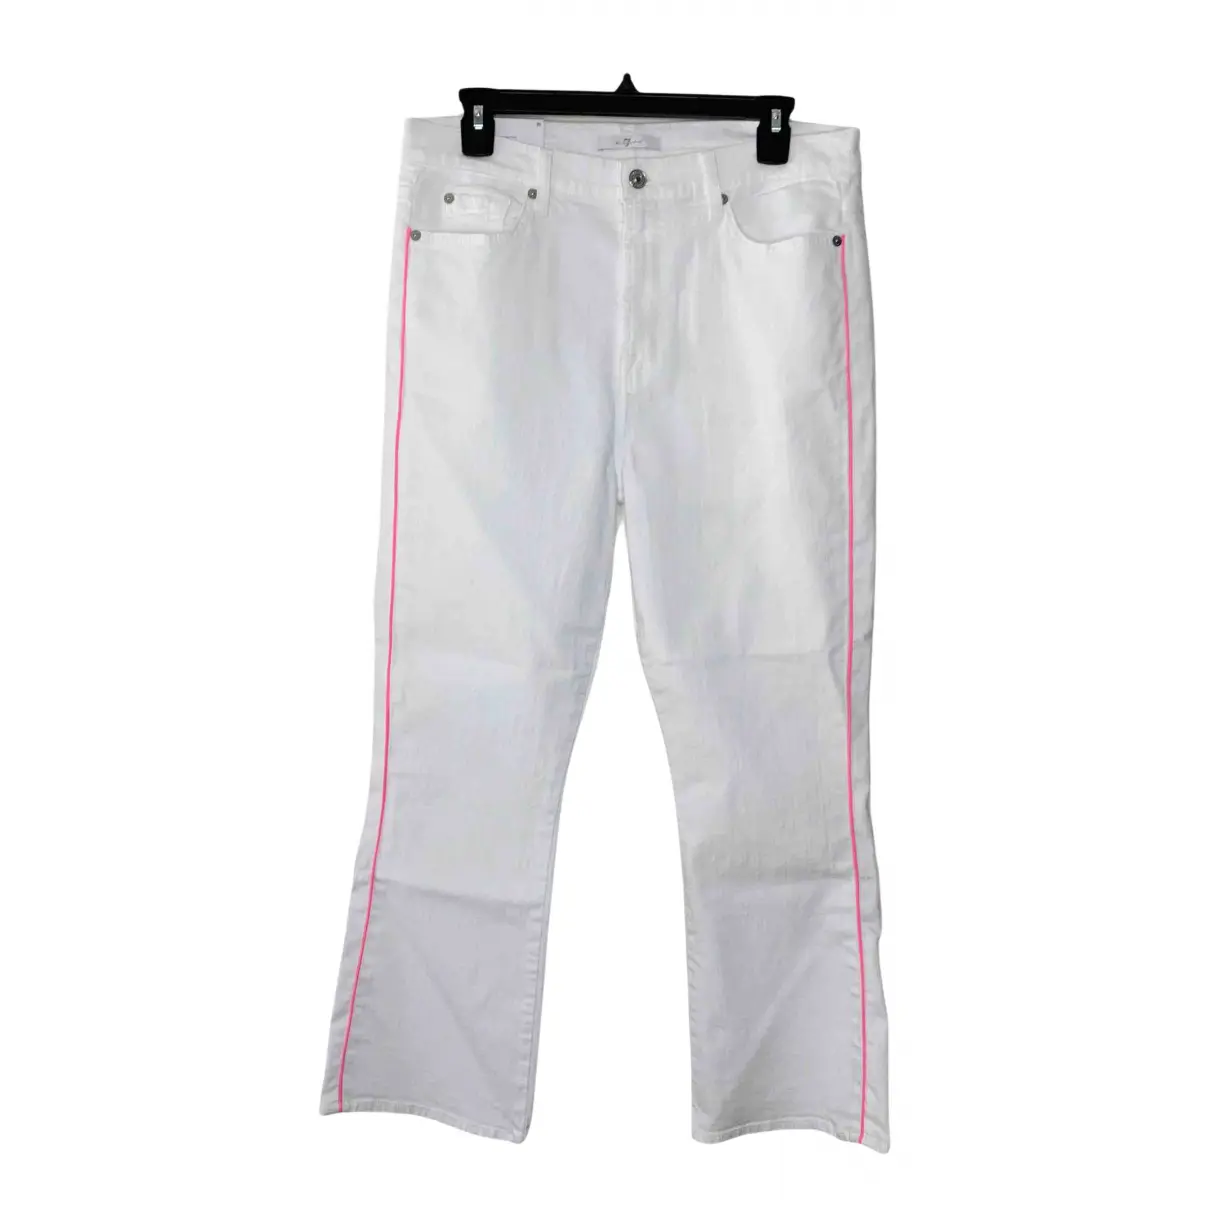 White Cotton Jeans 7 For All Mankind